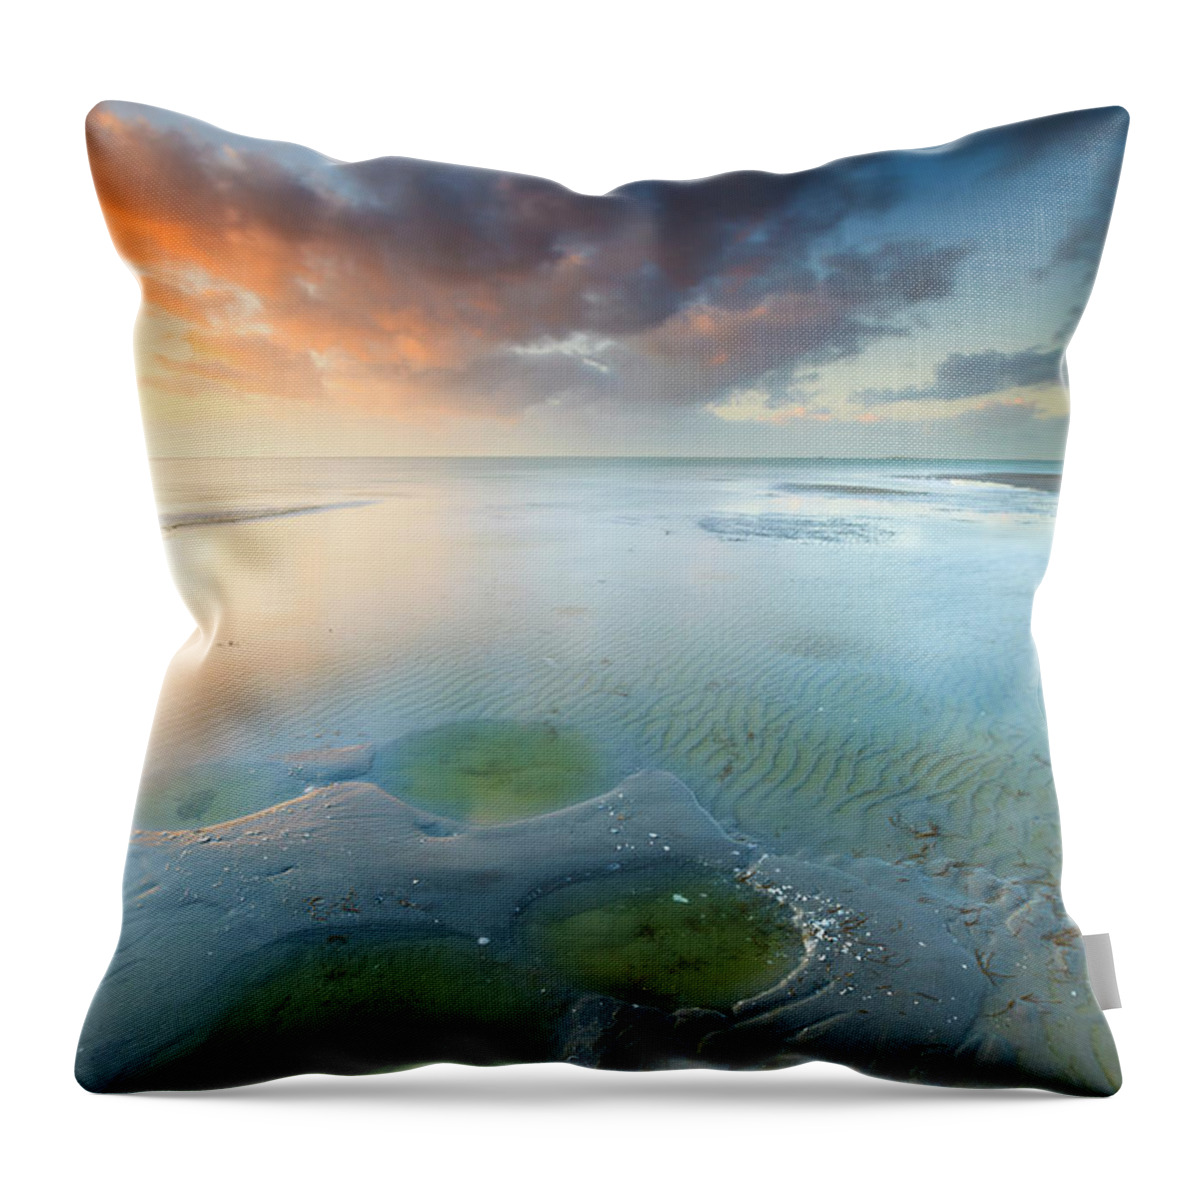 Tranquility Throw Pillow featuring the photograph Beautiful Beach Sunset by Bas Meelker Photography